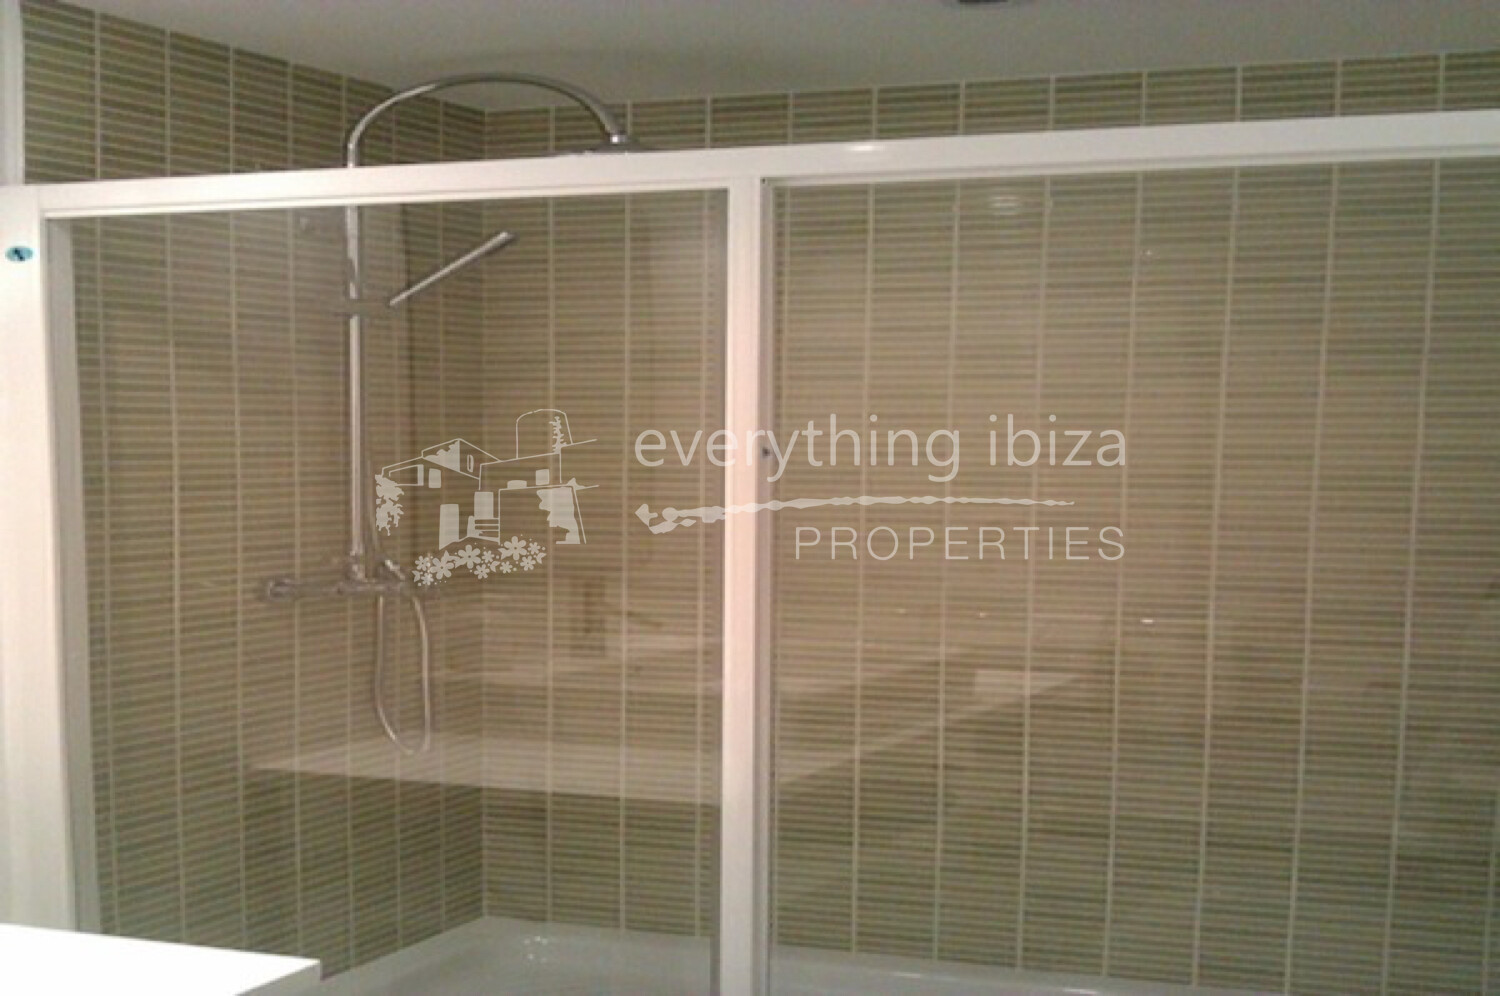 Modern Ground Floor Apartment Close to the Beach, ref. 1518, for sale in Ibiza by everything ibiza Properties